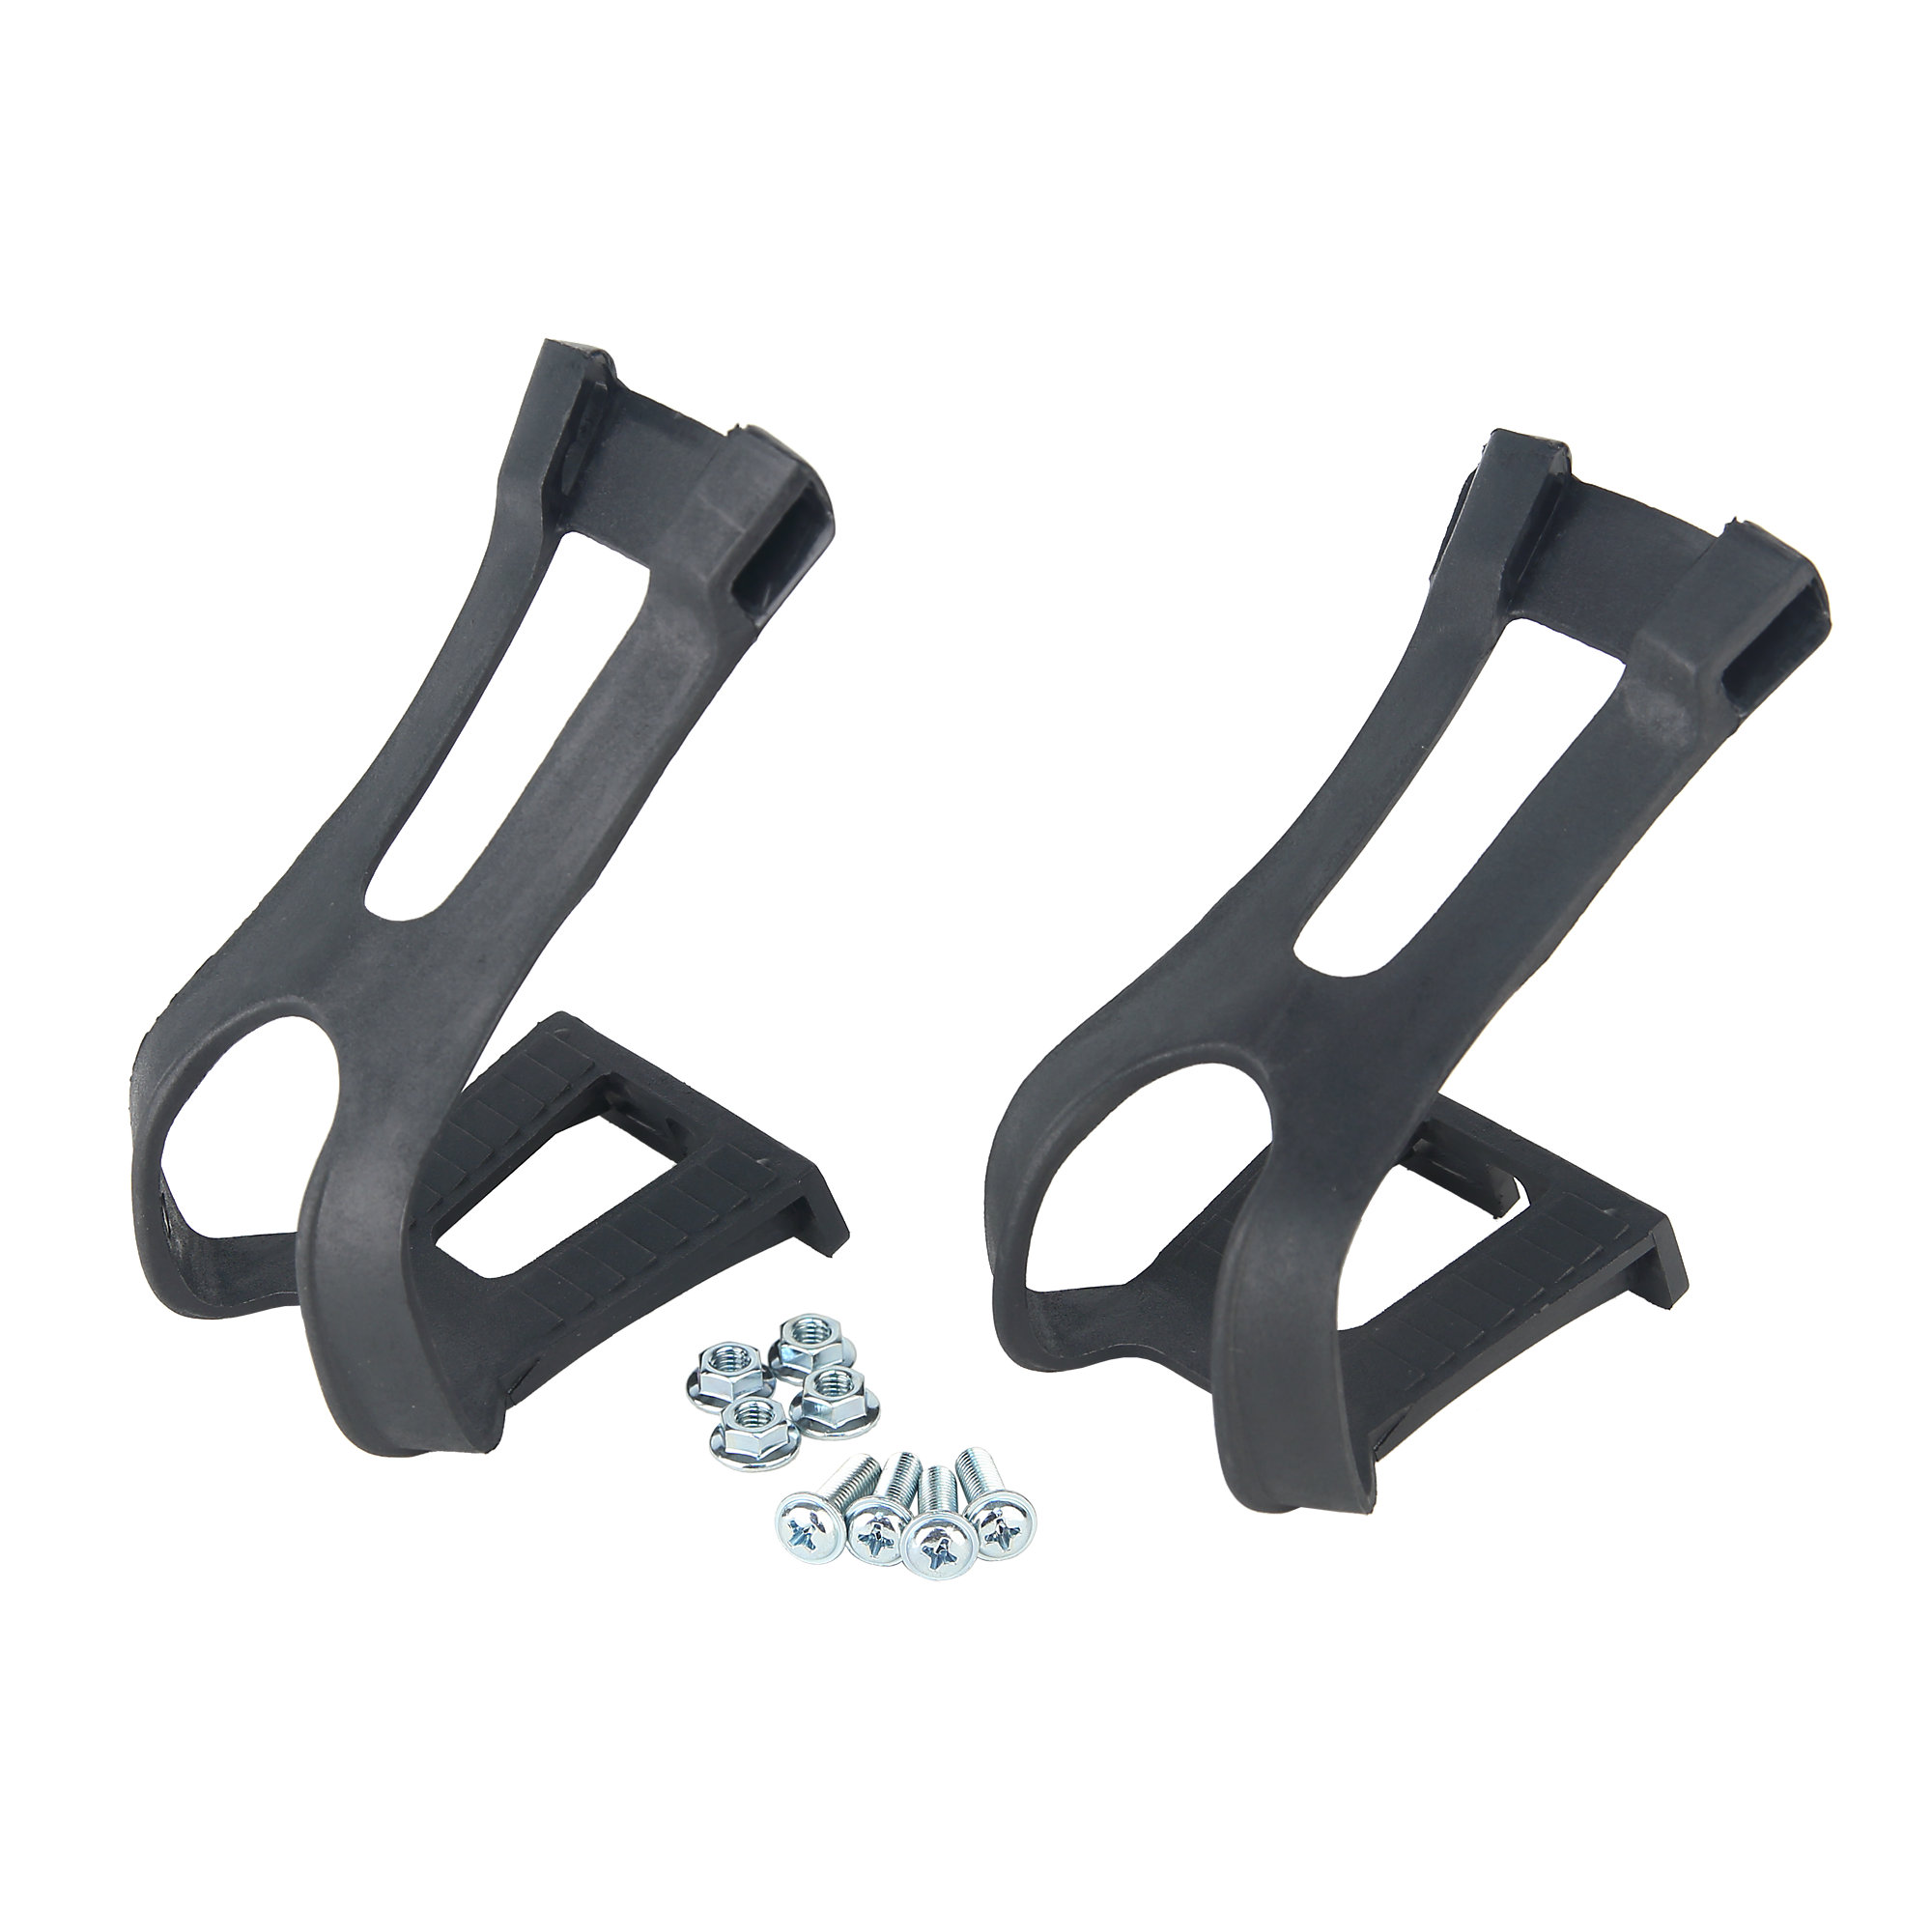 Toe Cages for Bike Pedals | Pair